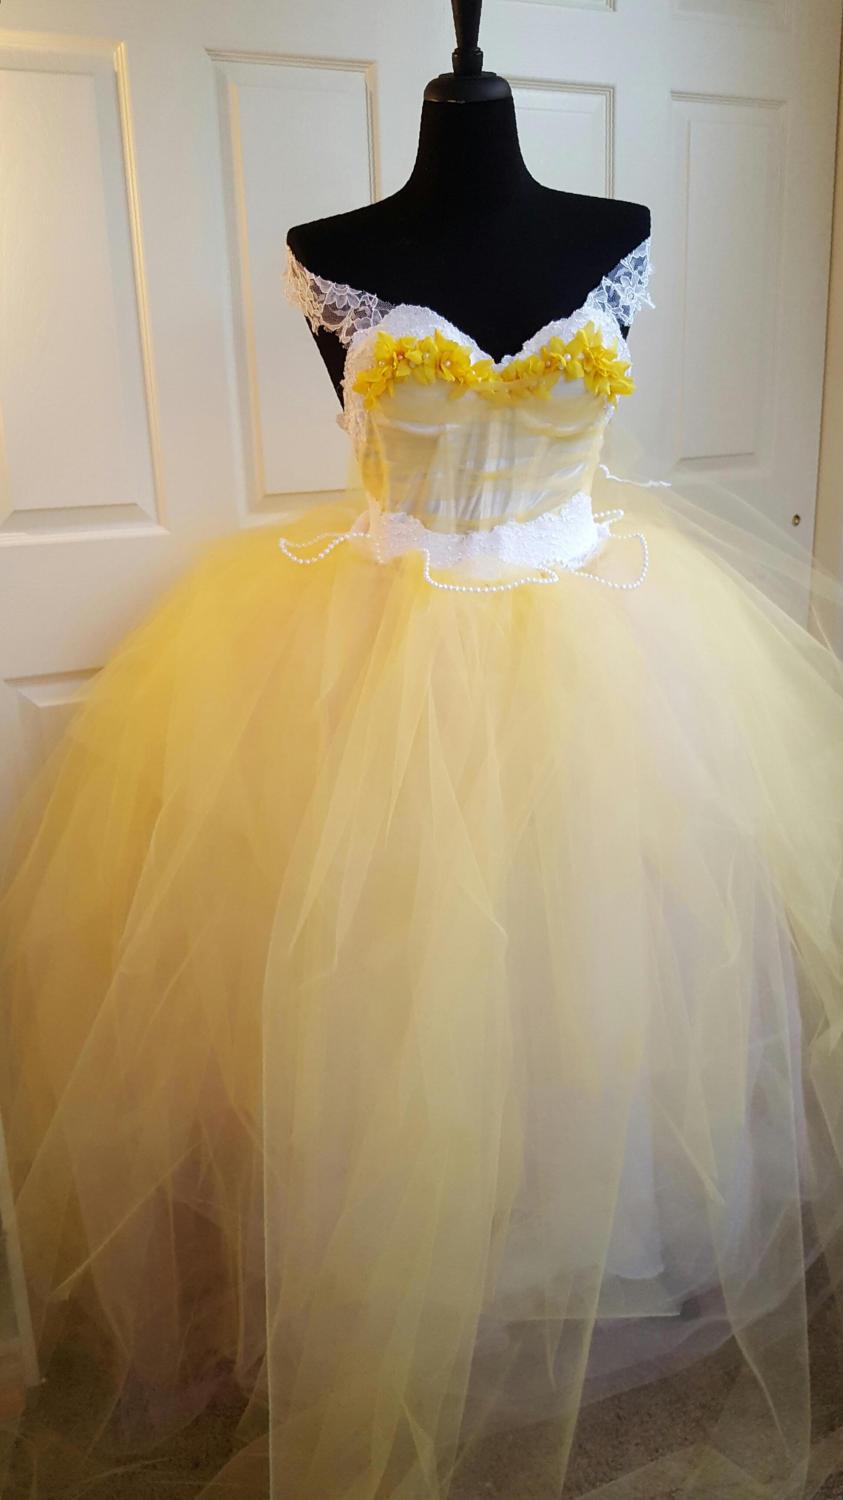 Wedding - Belle Beauty and the Beast Style Yellow White Fairytale Princess Corset w/Straps Lace Tulle Wedding Bridal Ballgown Costume Quinceanera Prom